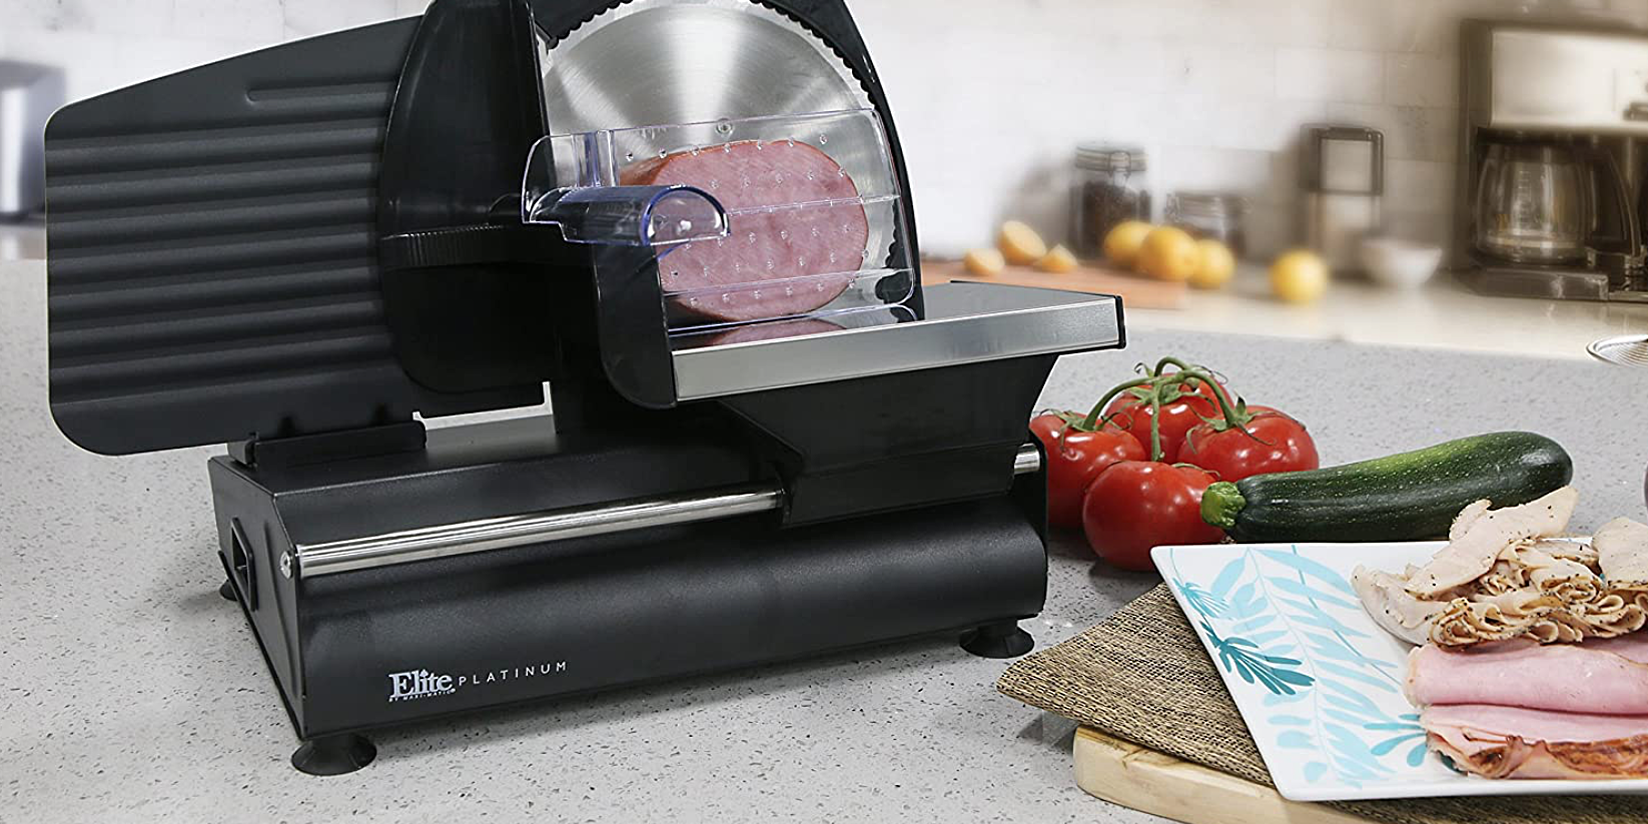 Best Meat Slicers on Amazon, According to Reviews